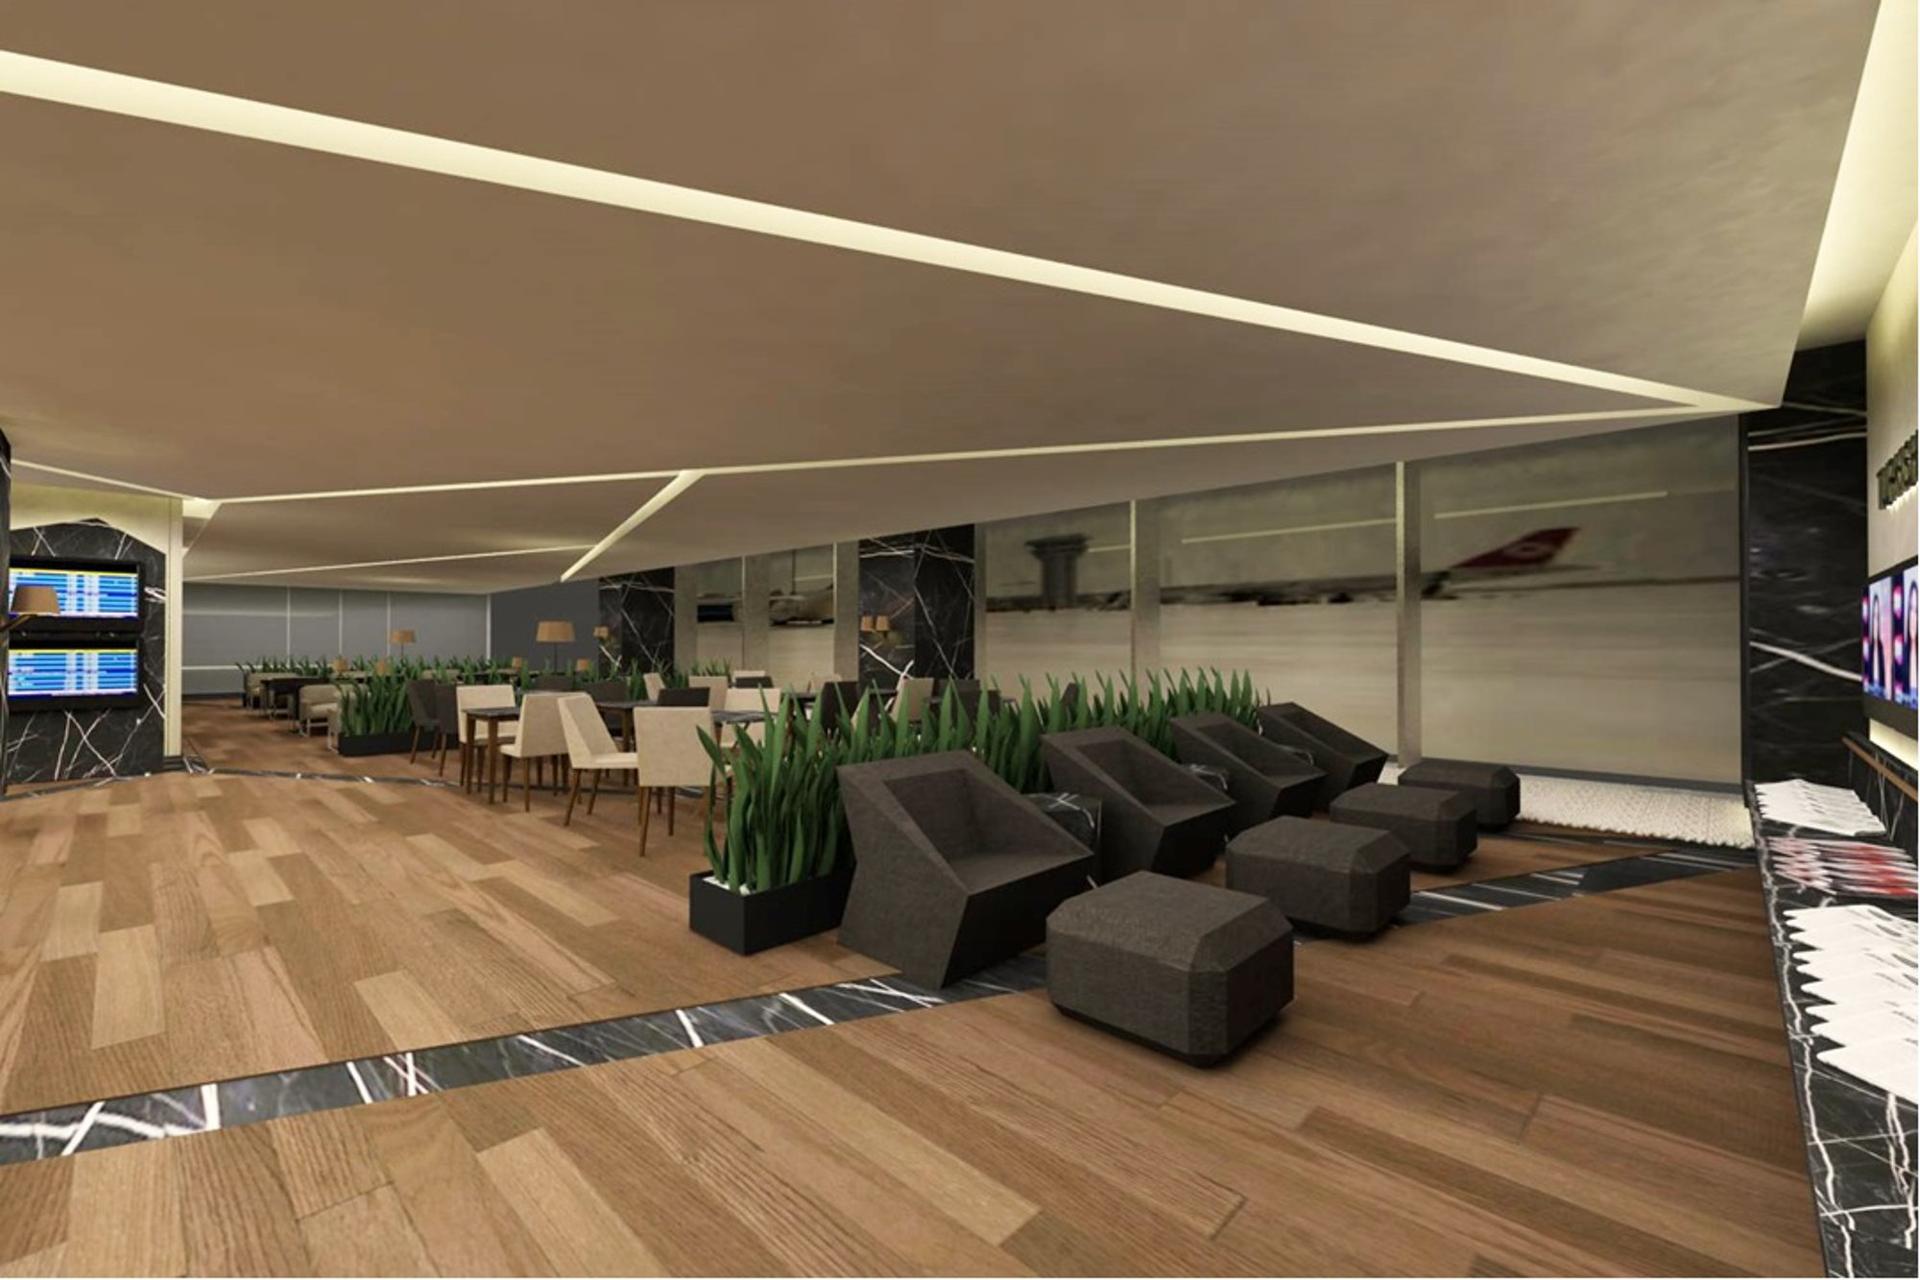 Turkish Airlines CIP Lounge (Business Lounge) image 21 of 27